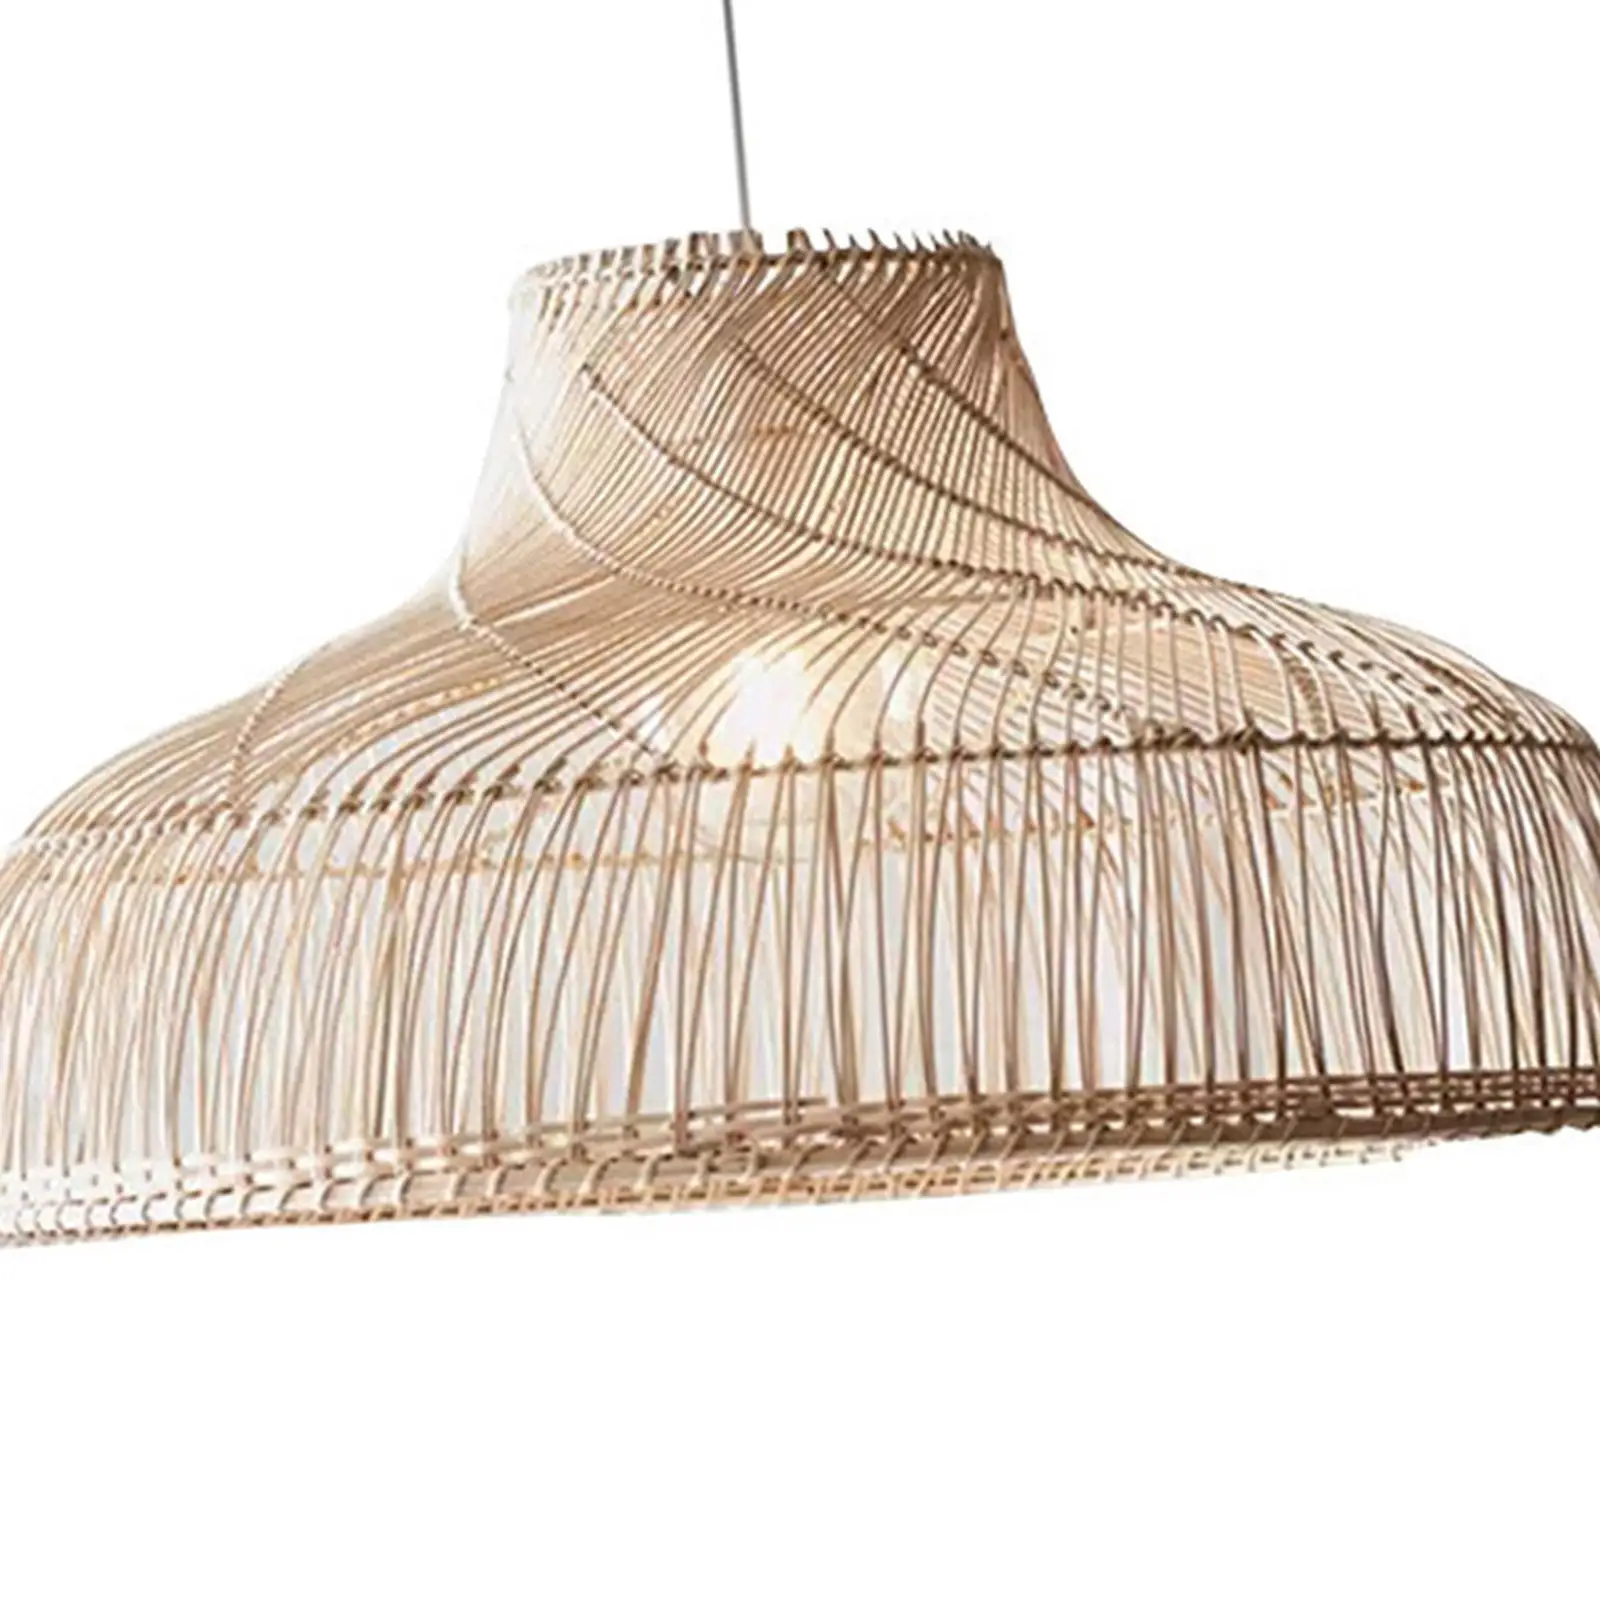 Rattan Woven Lampshade Chandelier Cover Pendant Lamp Shade for Bedroom Home